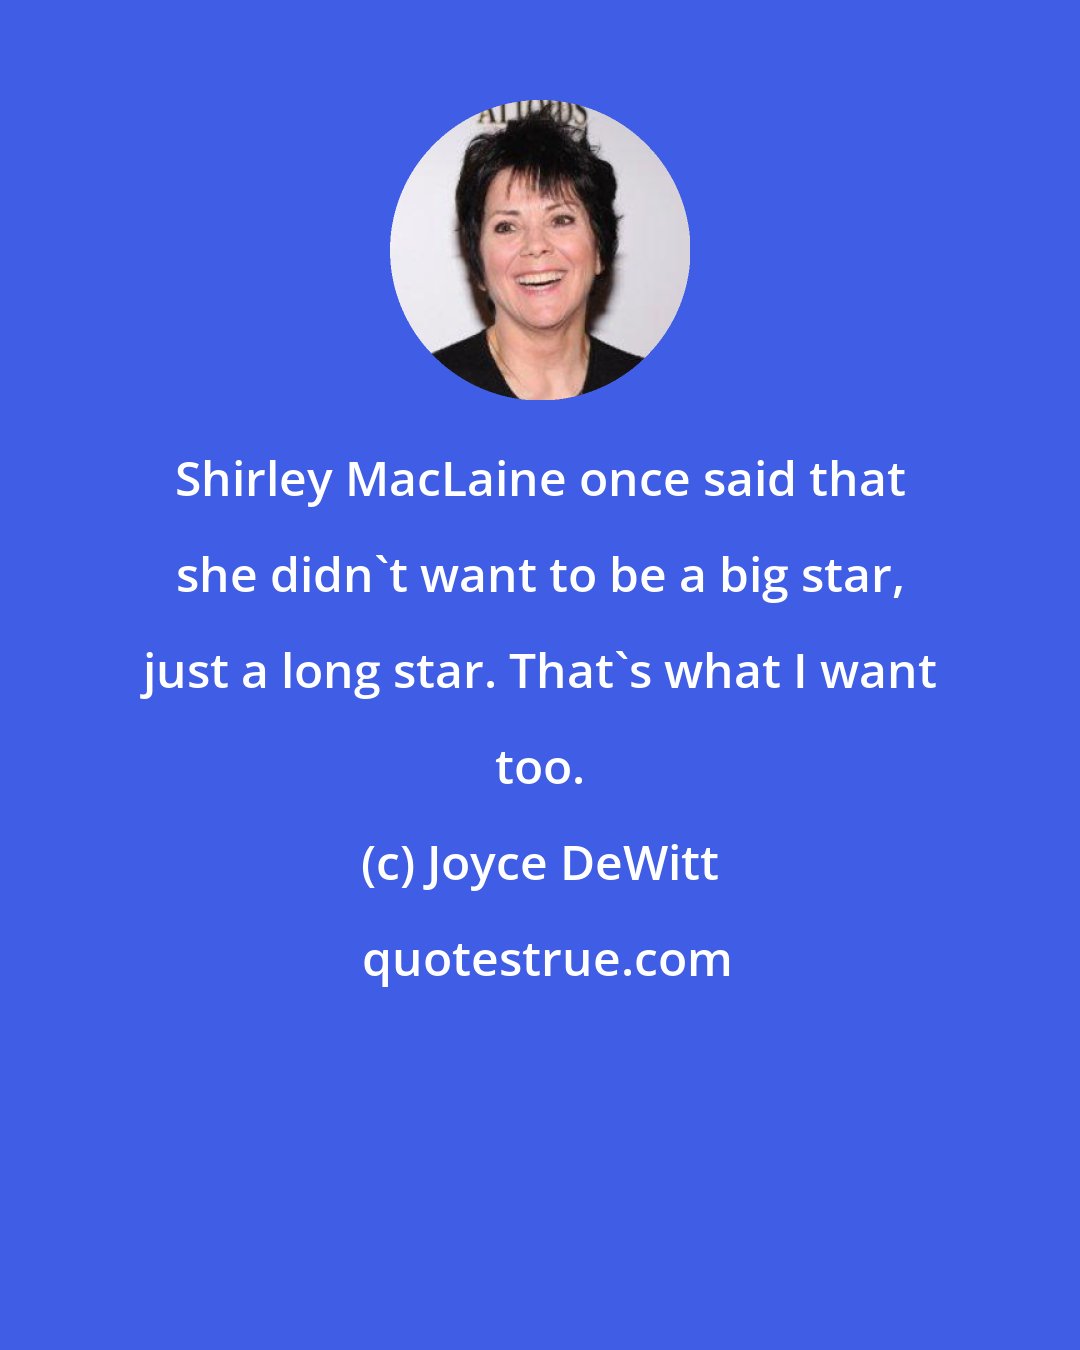 Joyce DeWitt: Shirley MacLaine once said that she didn't want to be a big star, just a long star. That's what I want too.